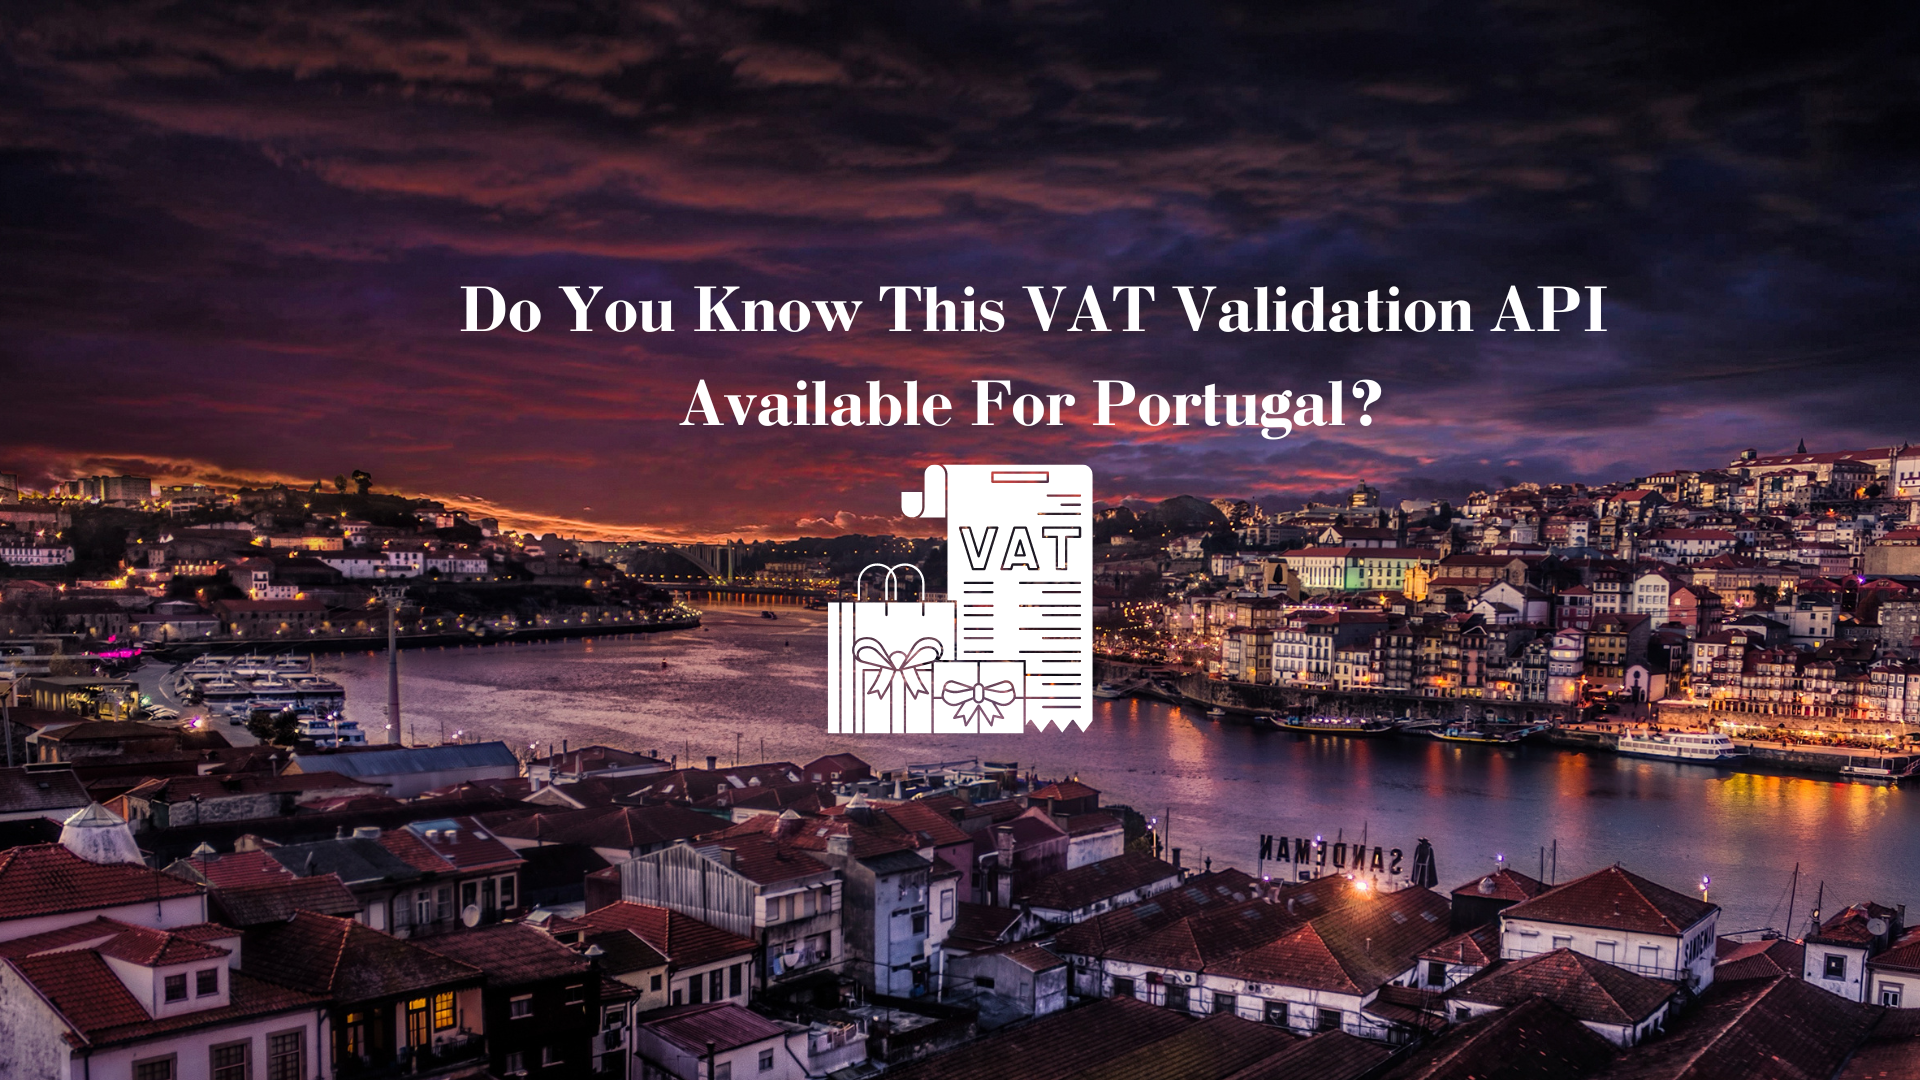 Do You Know This VAT Validation API Available For Portugal?